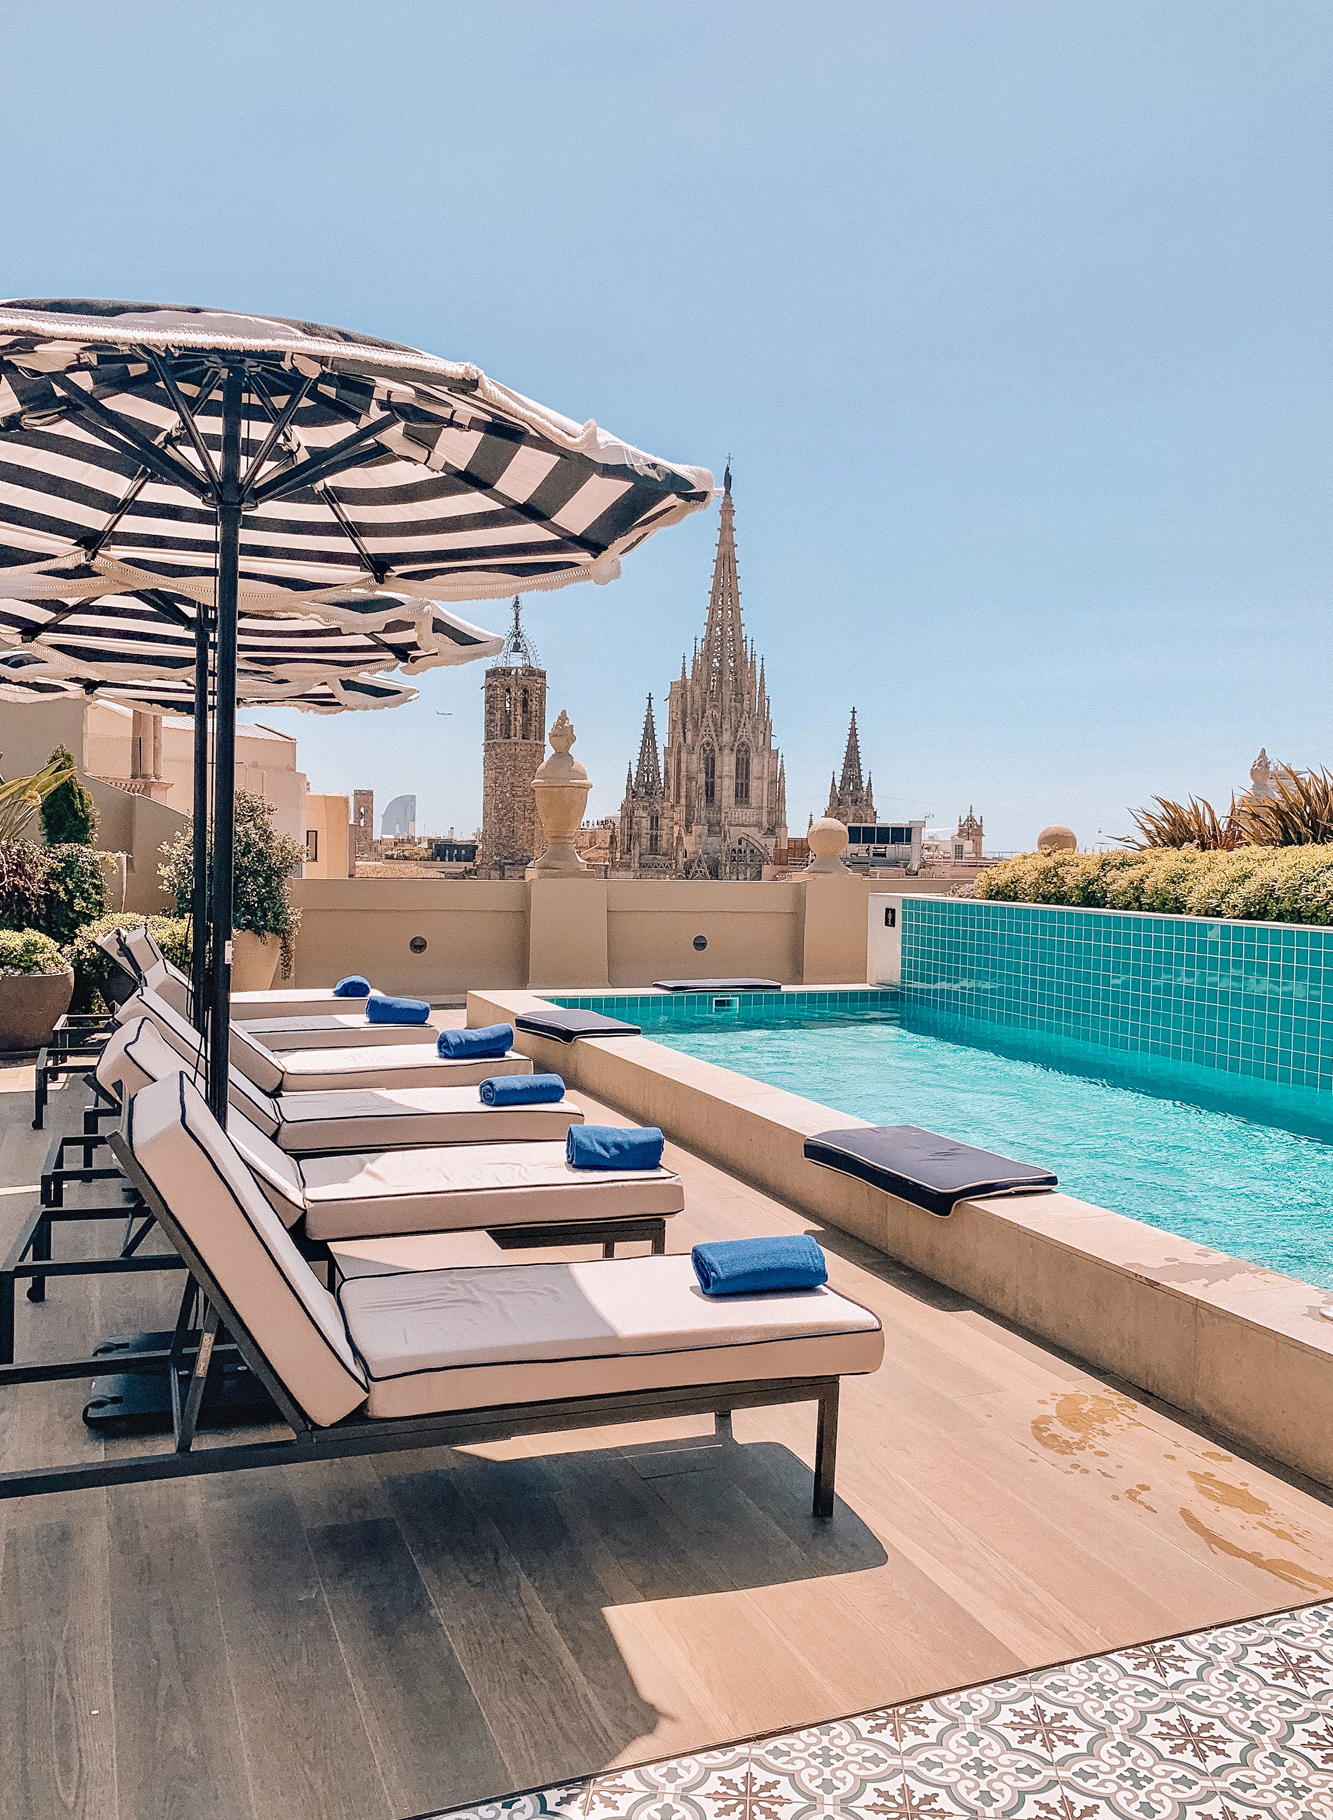 Barcelona Travel Guide - Where to stay, eat and play in one of the most popular cities in Spain! One of our favorite cities.